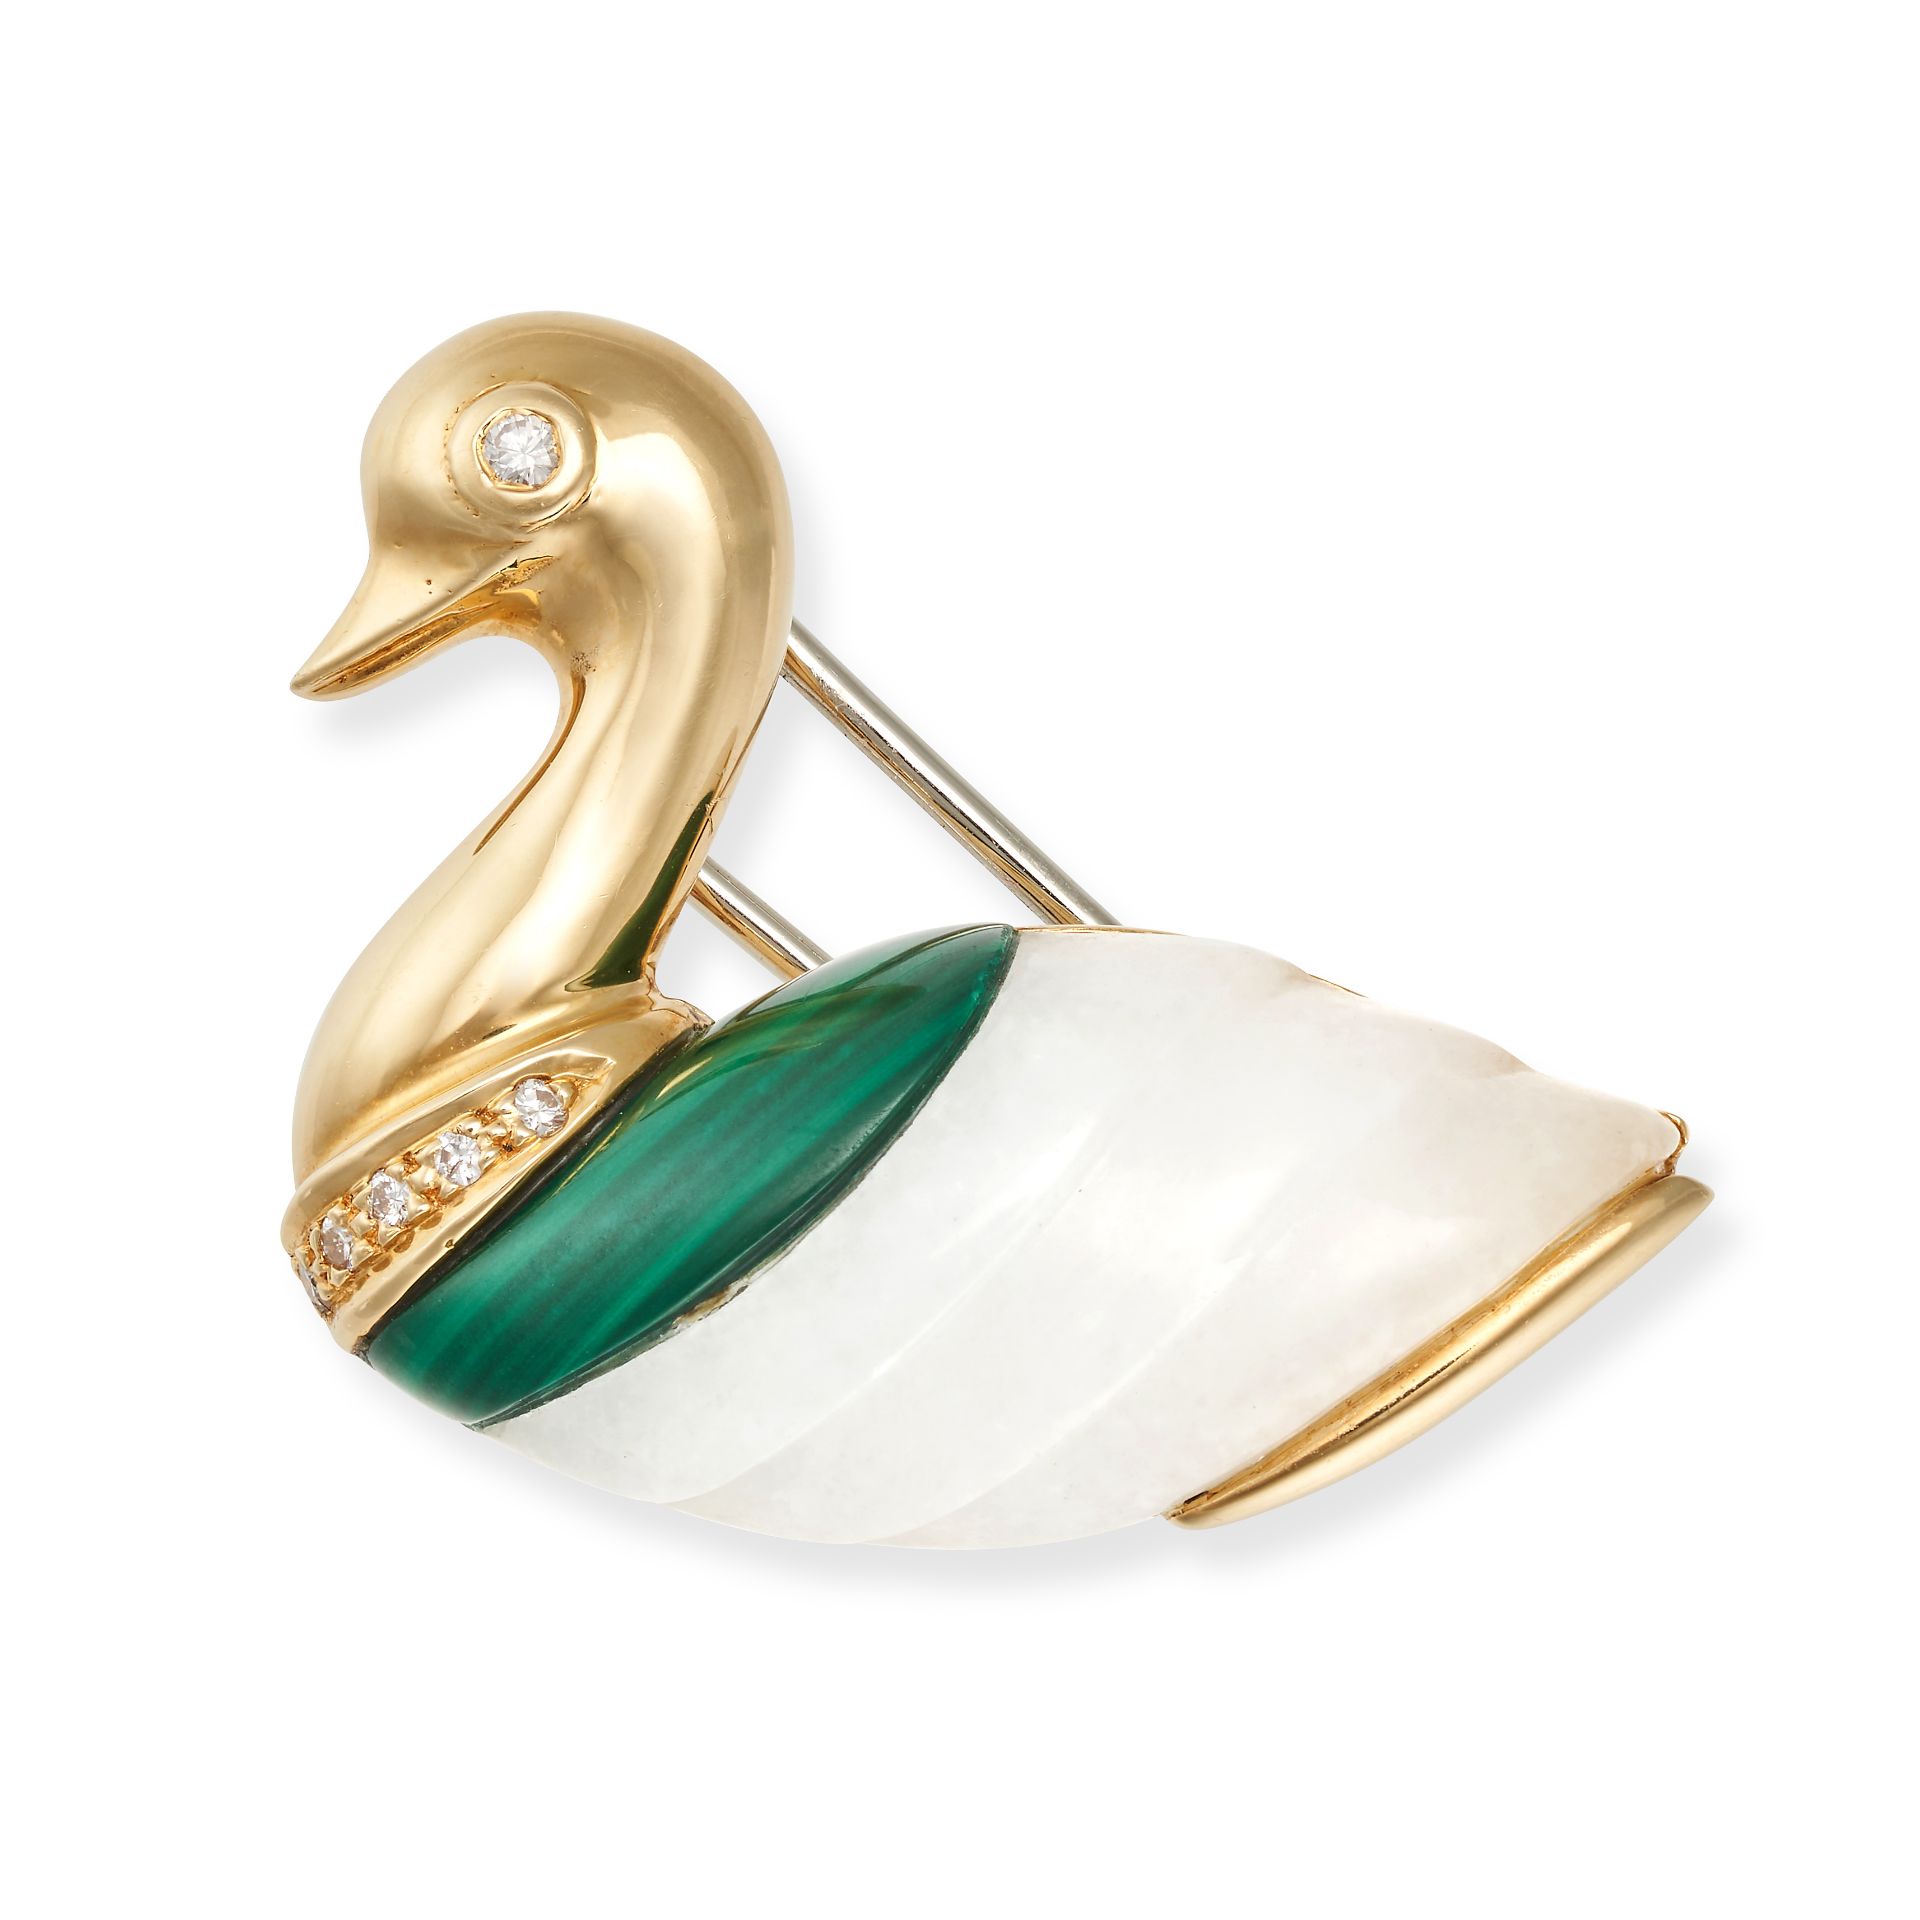 A MALACHITE, WHITE JADE AND DIAMOND SWAN BROOCH in 18ct yellow gold, designed as a swan set with ...